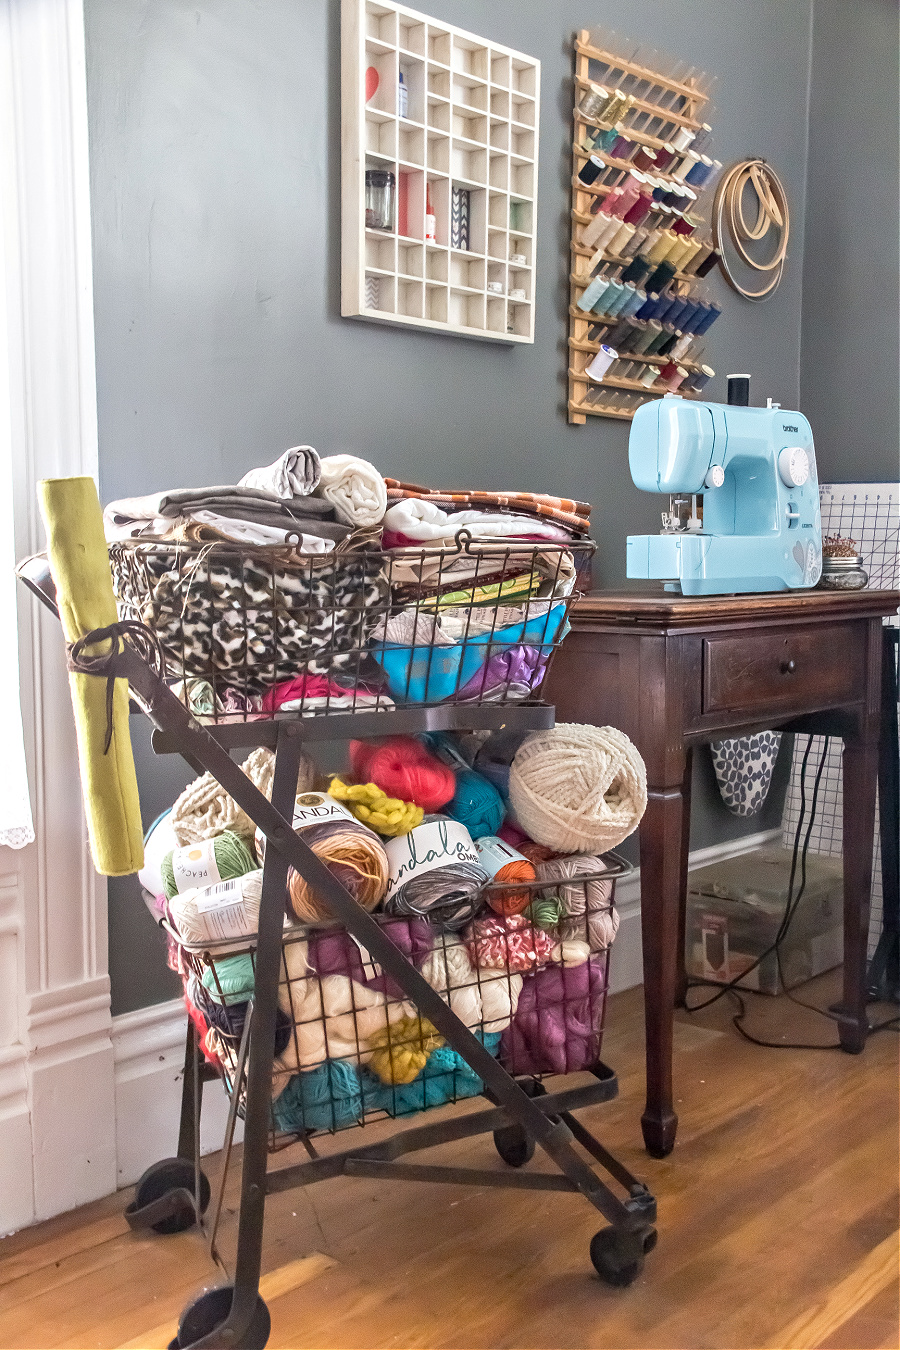 sewing room ideas including a vintage shopping cart for yarn and fabric